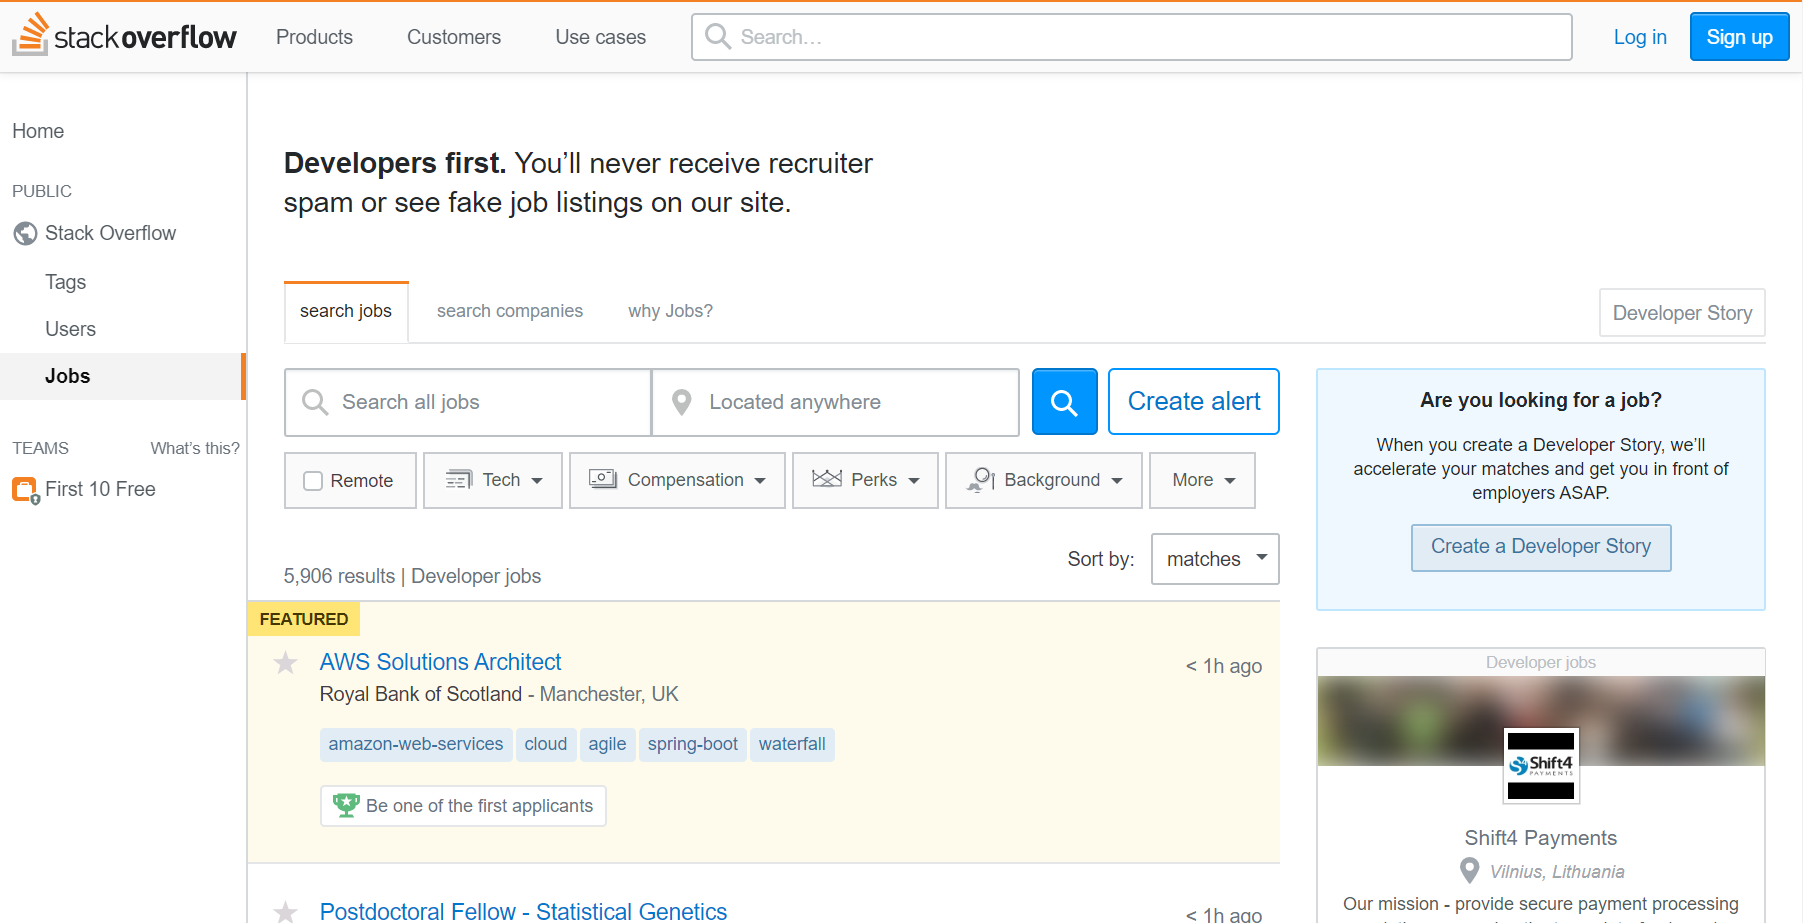 stack overflow job search